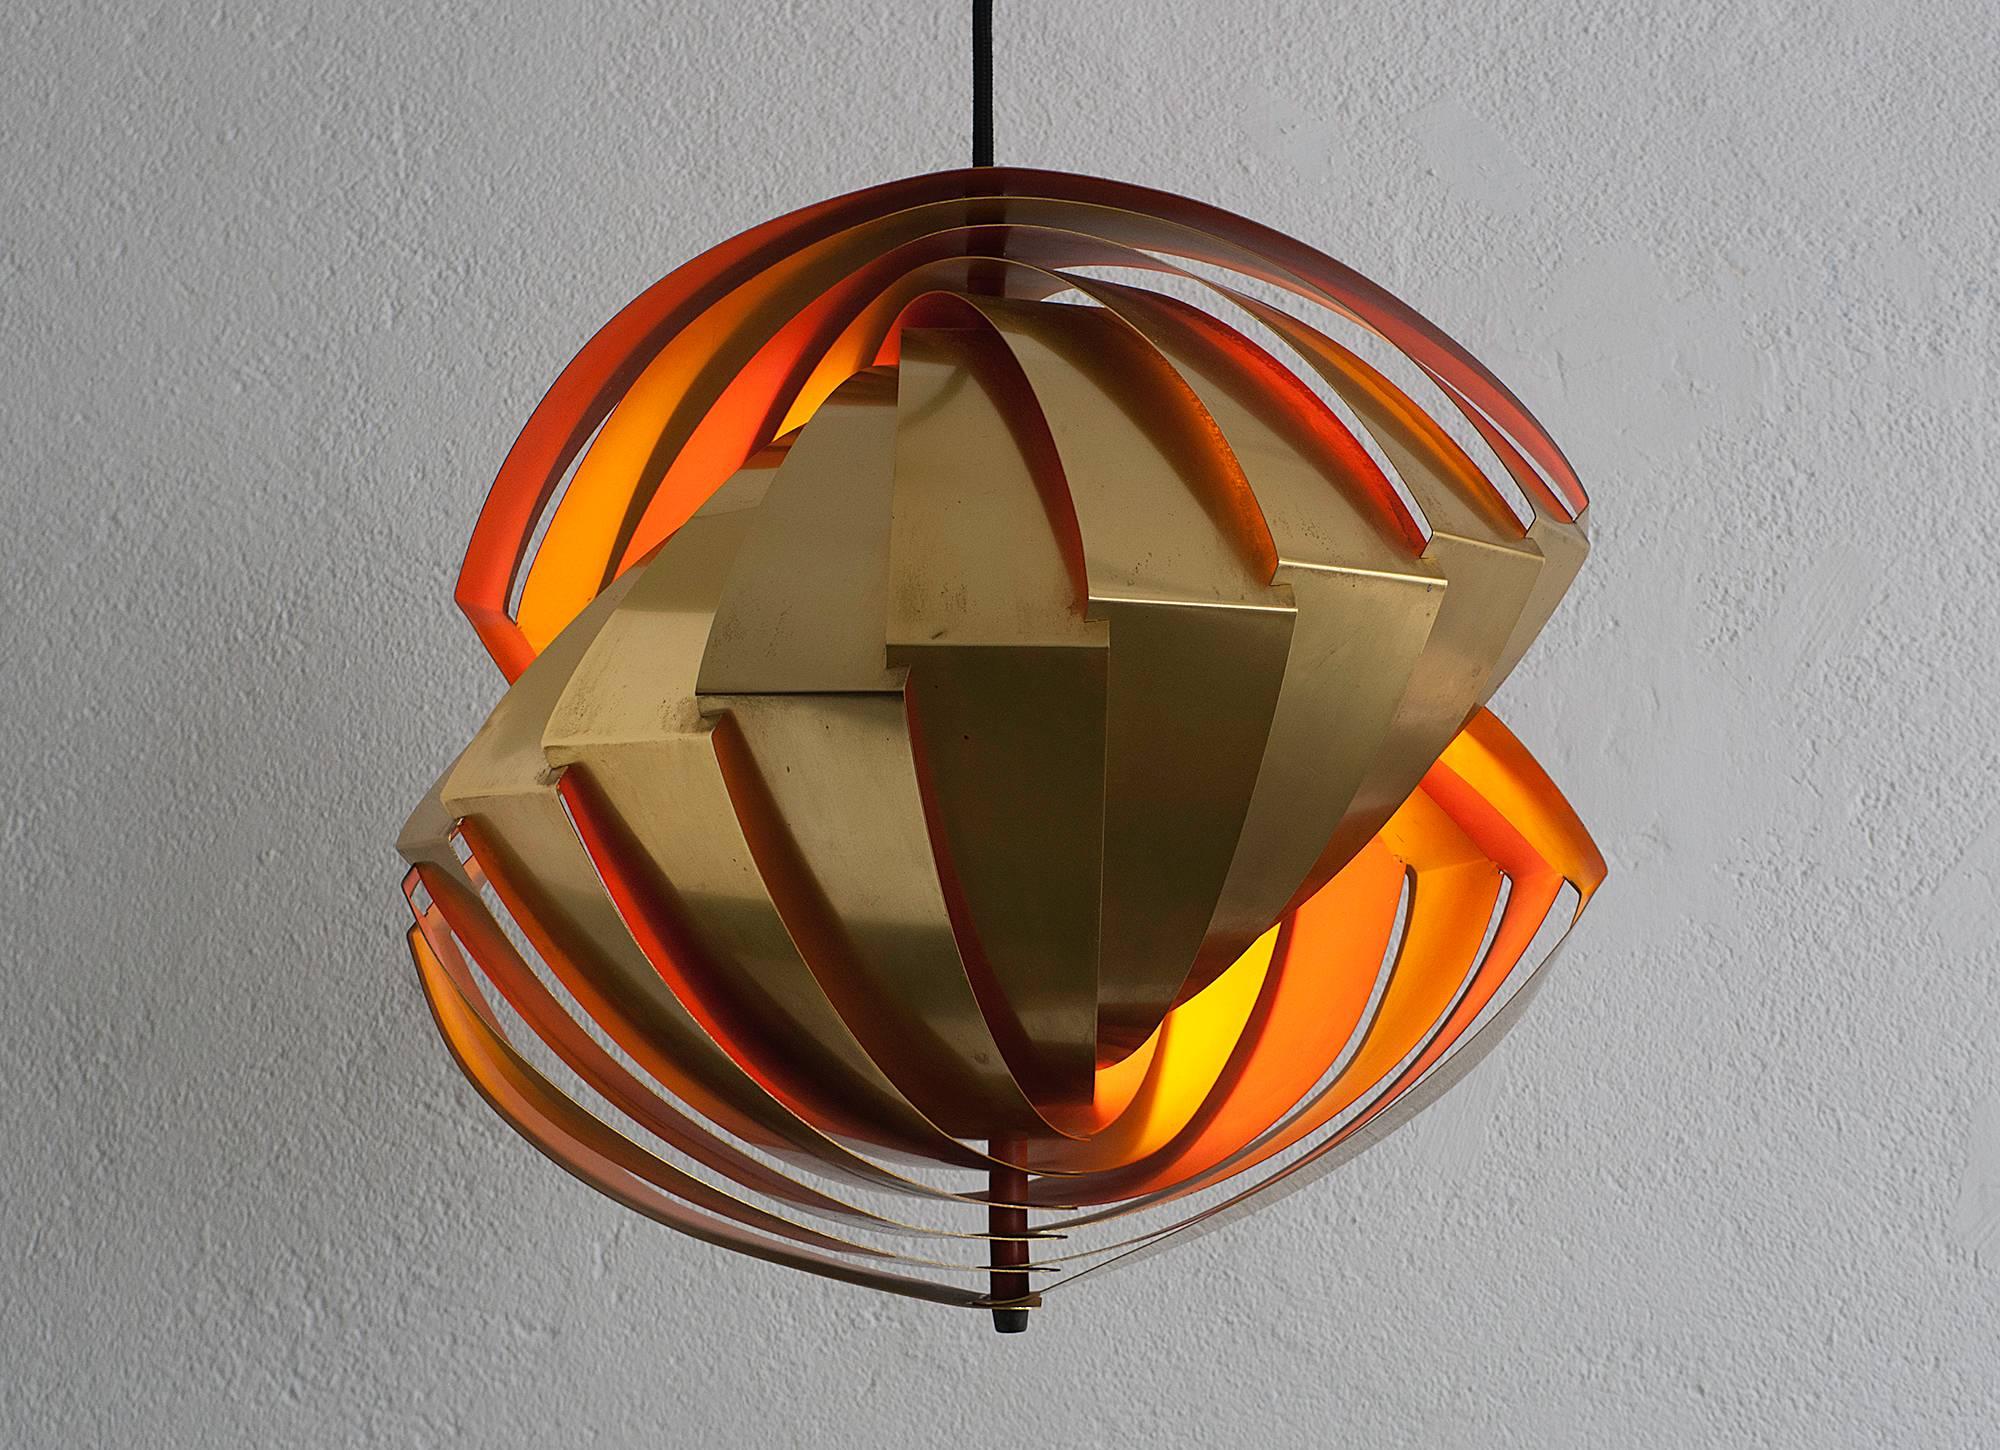 Beautiful brass pendant lamp designed by Danish architect Louis Weisdorf in 1963 and produced by Lyfa for a few years only because of high production costs.

High quality and ingenious design which stirs the imagination and provides an ever